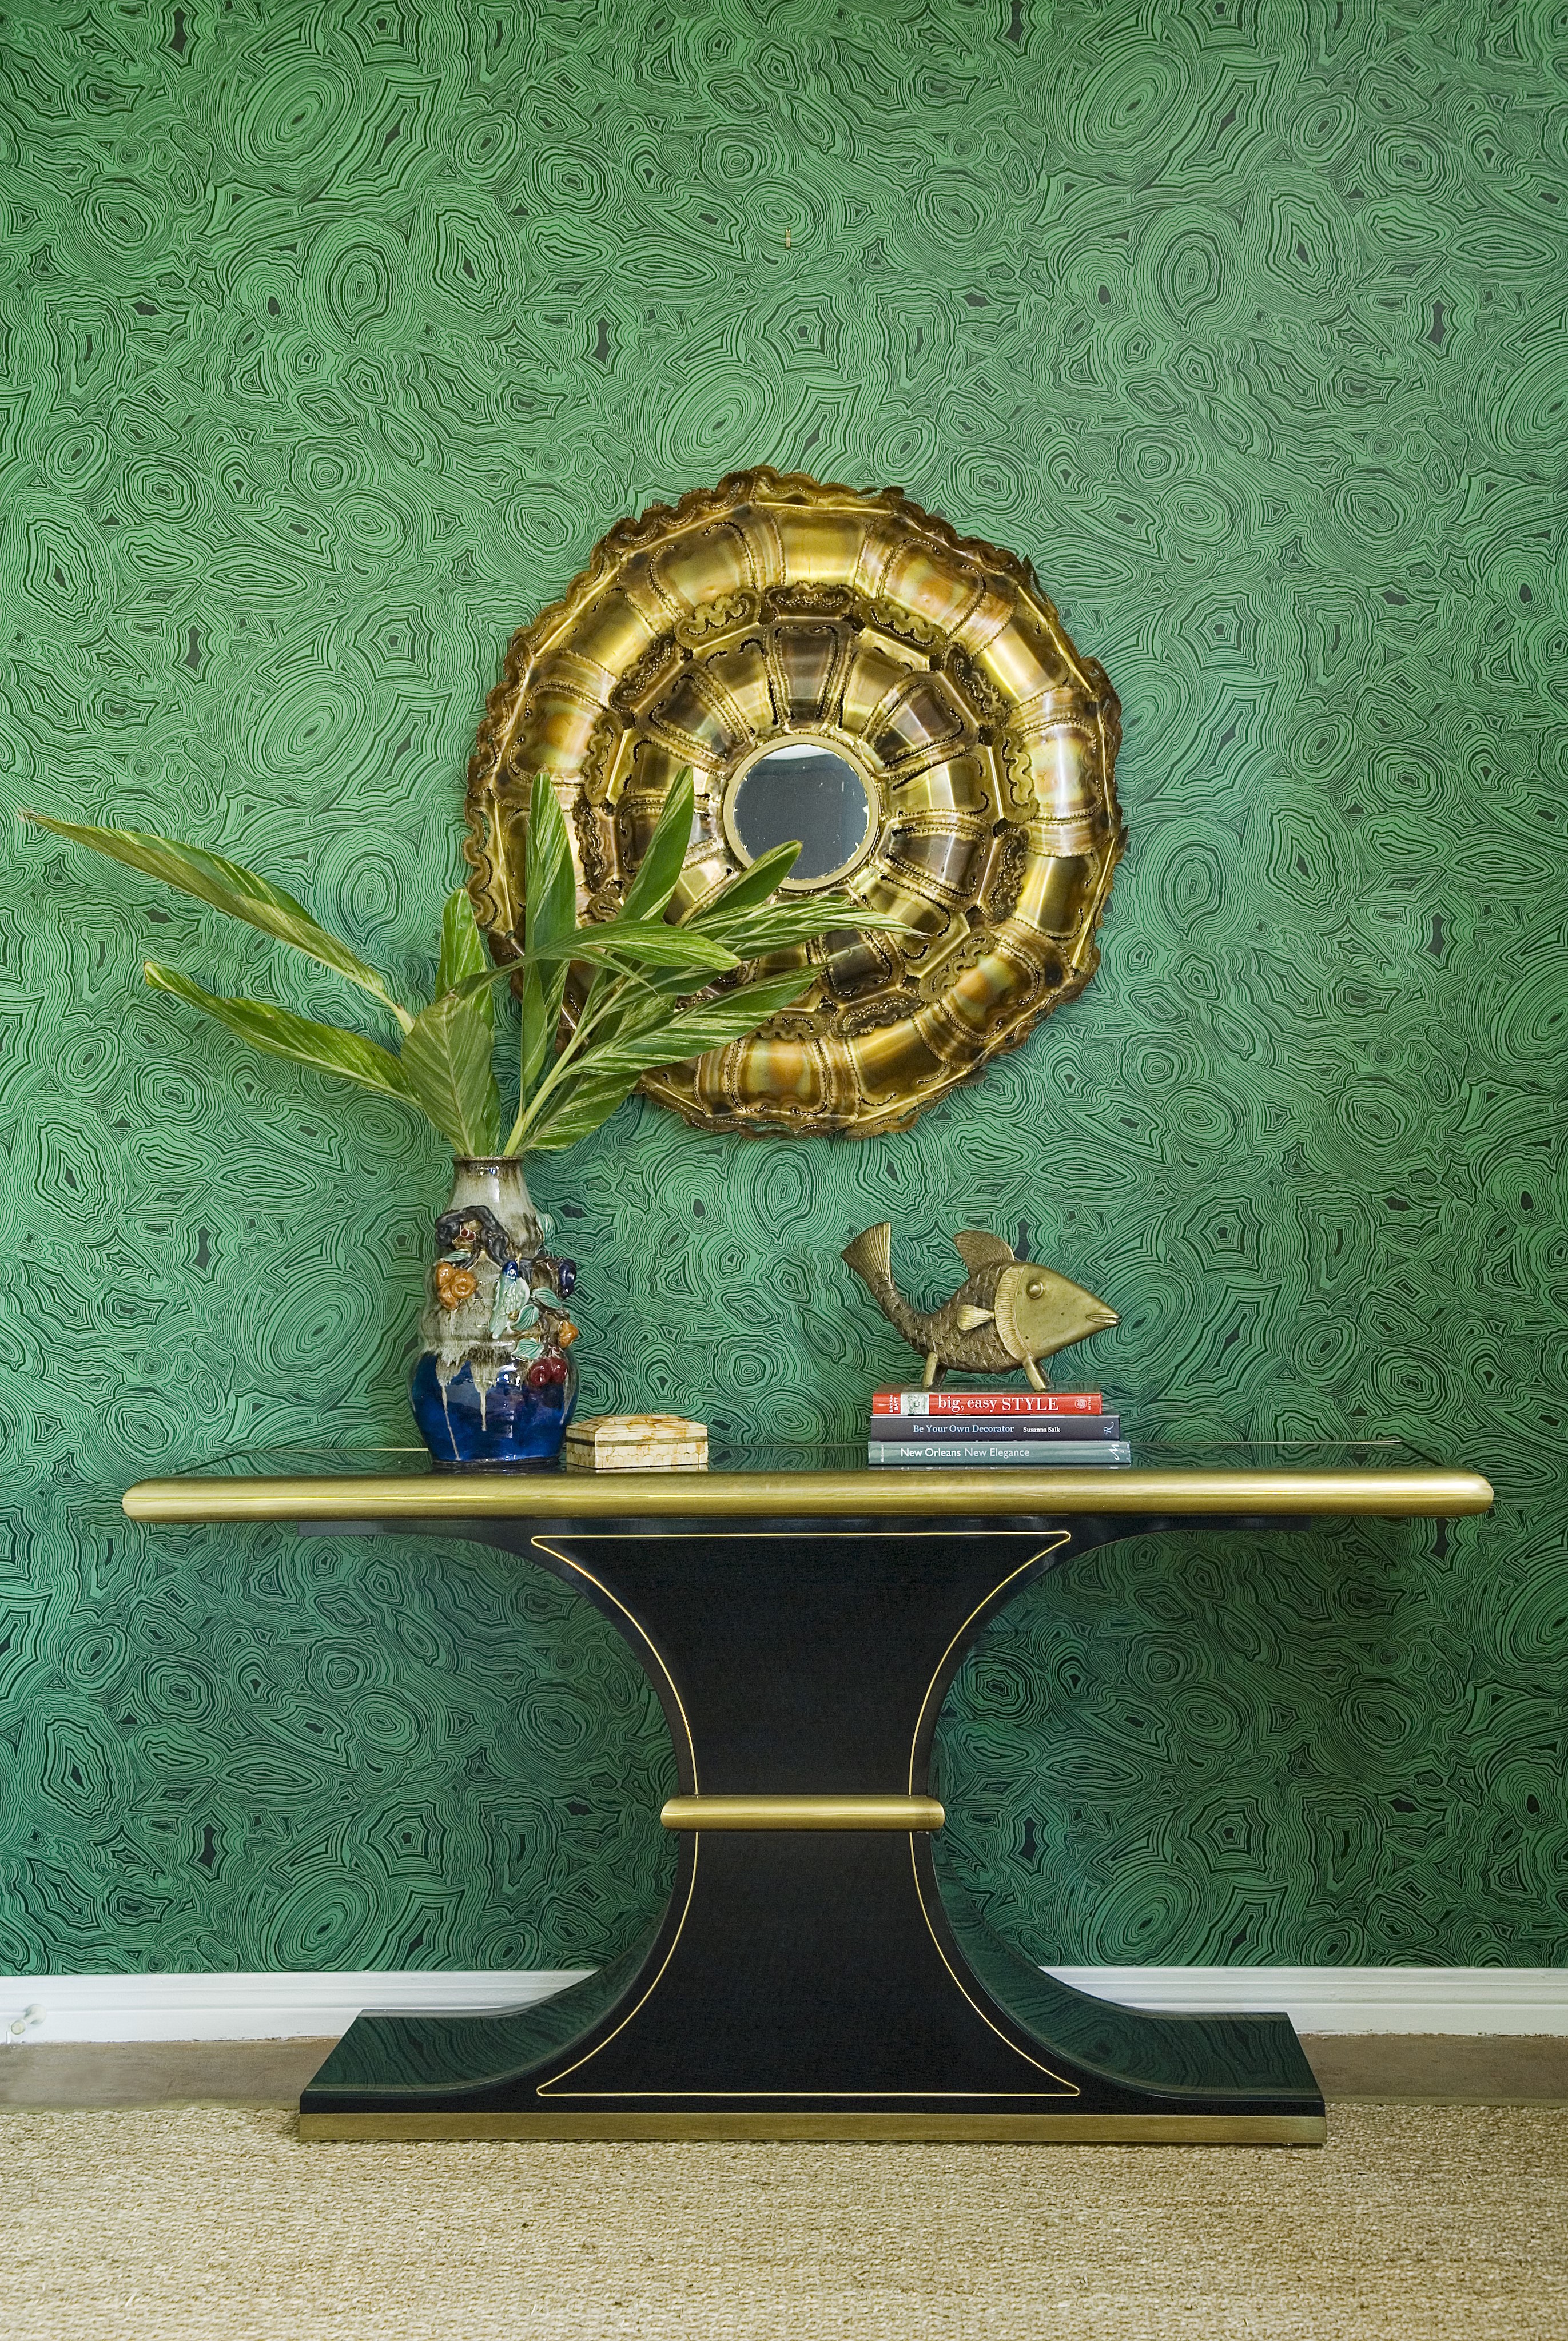 A shelf with a vase, books, and a plant in a vase. The shelf is against a green wall. There is a gold mirror on the wall. 